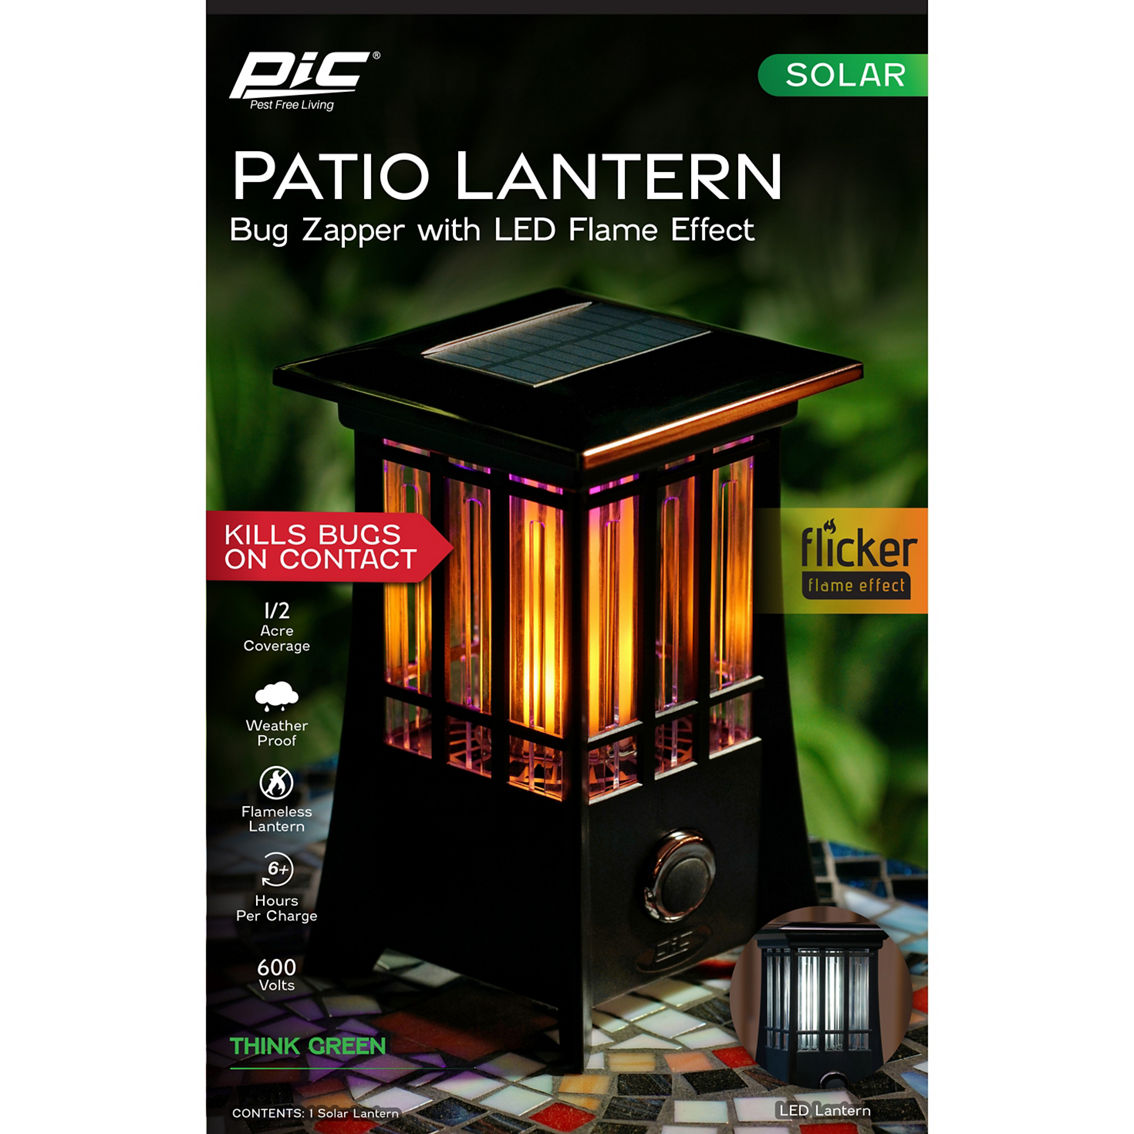 PIC Solar 2-in-1 Flame Effect Patio Lantern Bug Zapper - Image 2 of 7